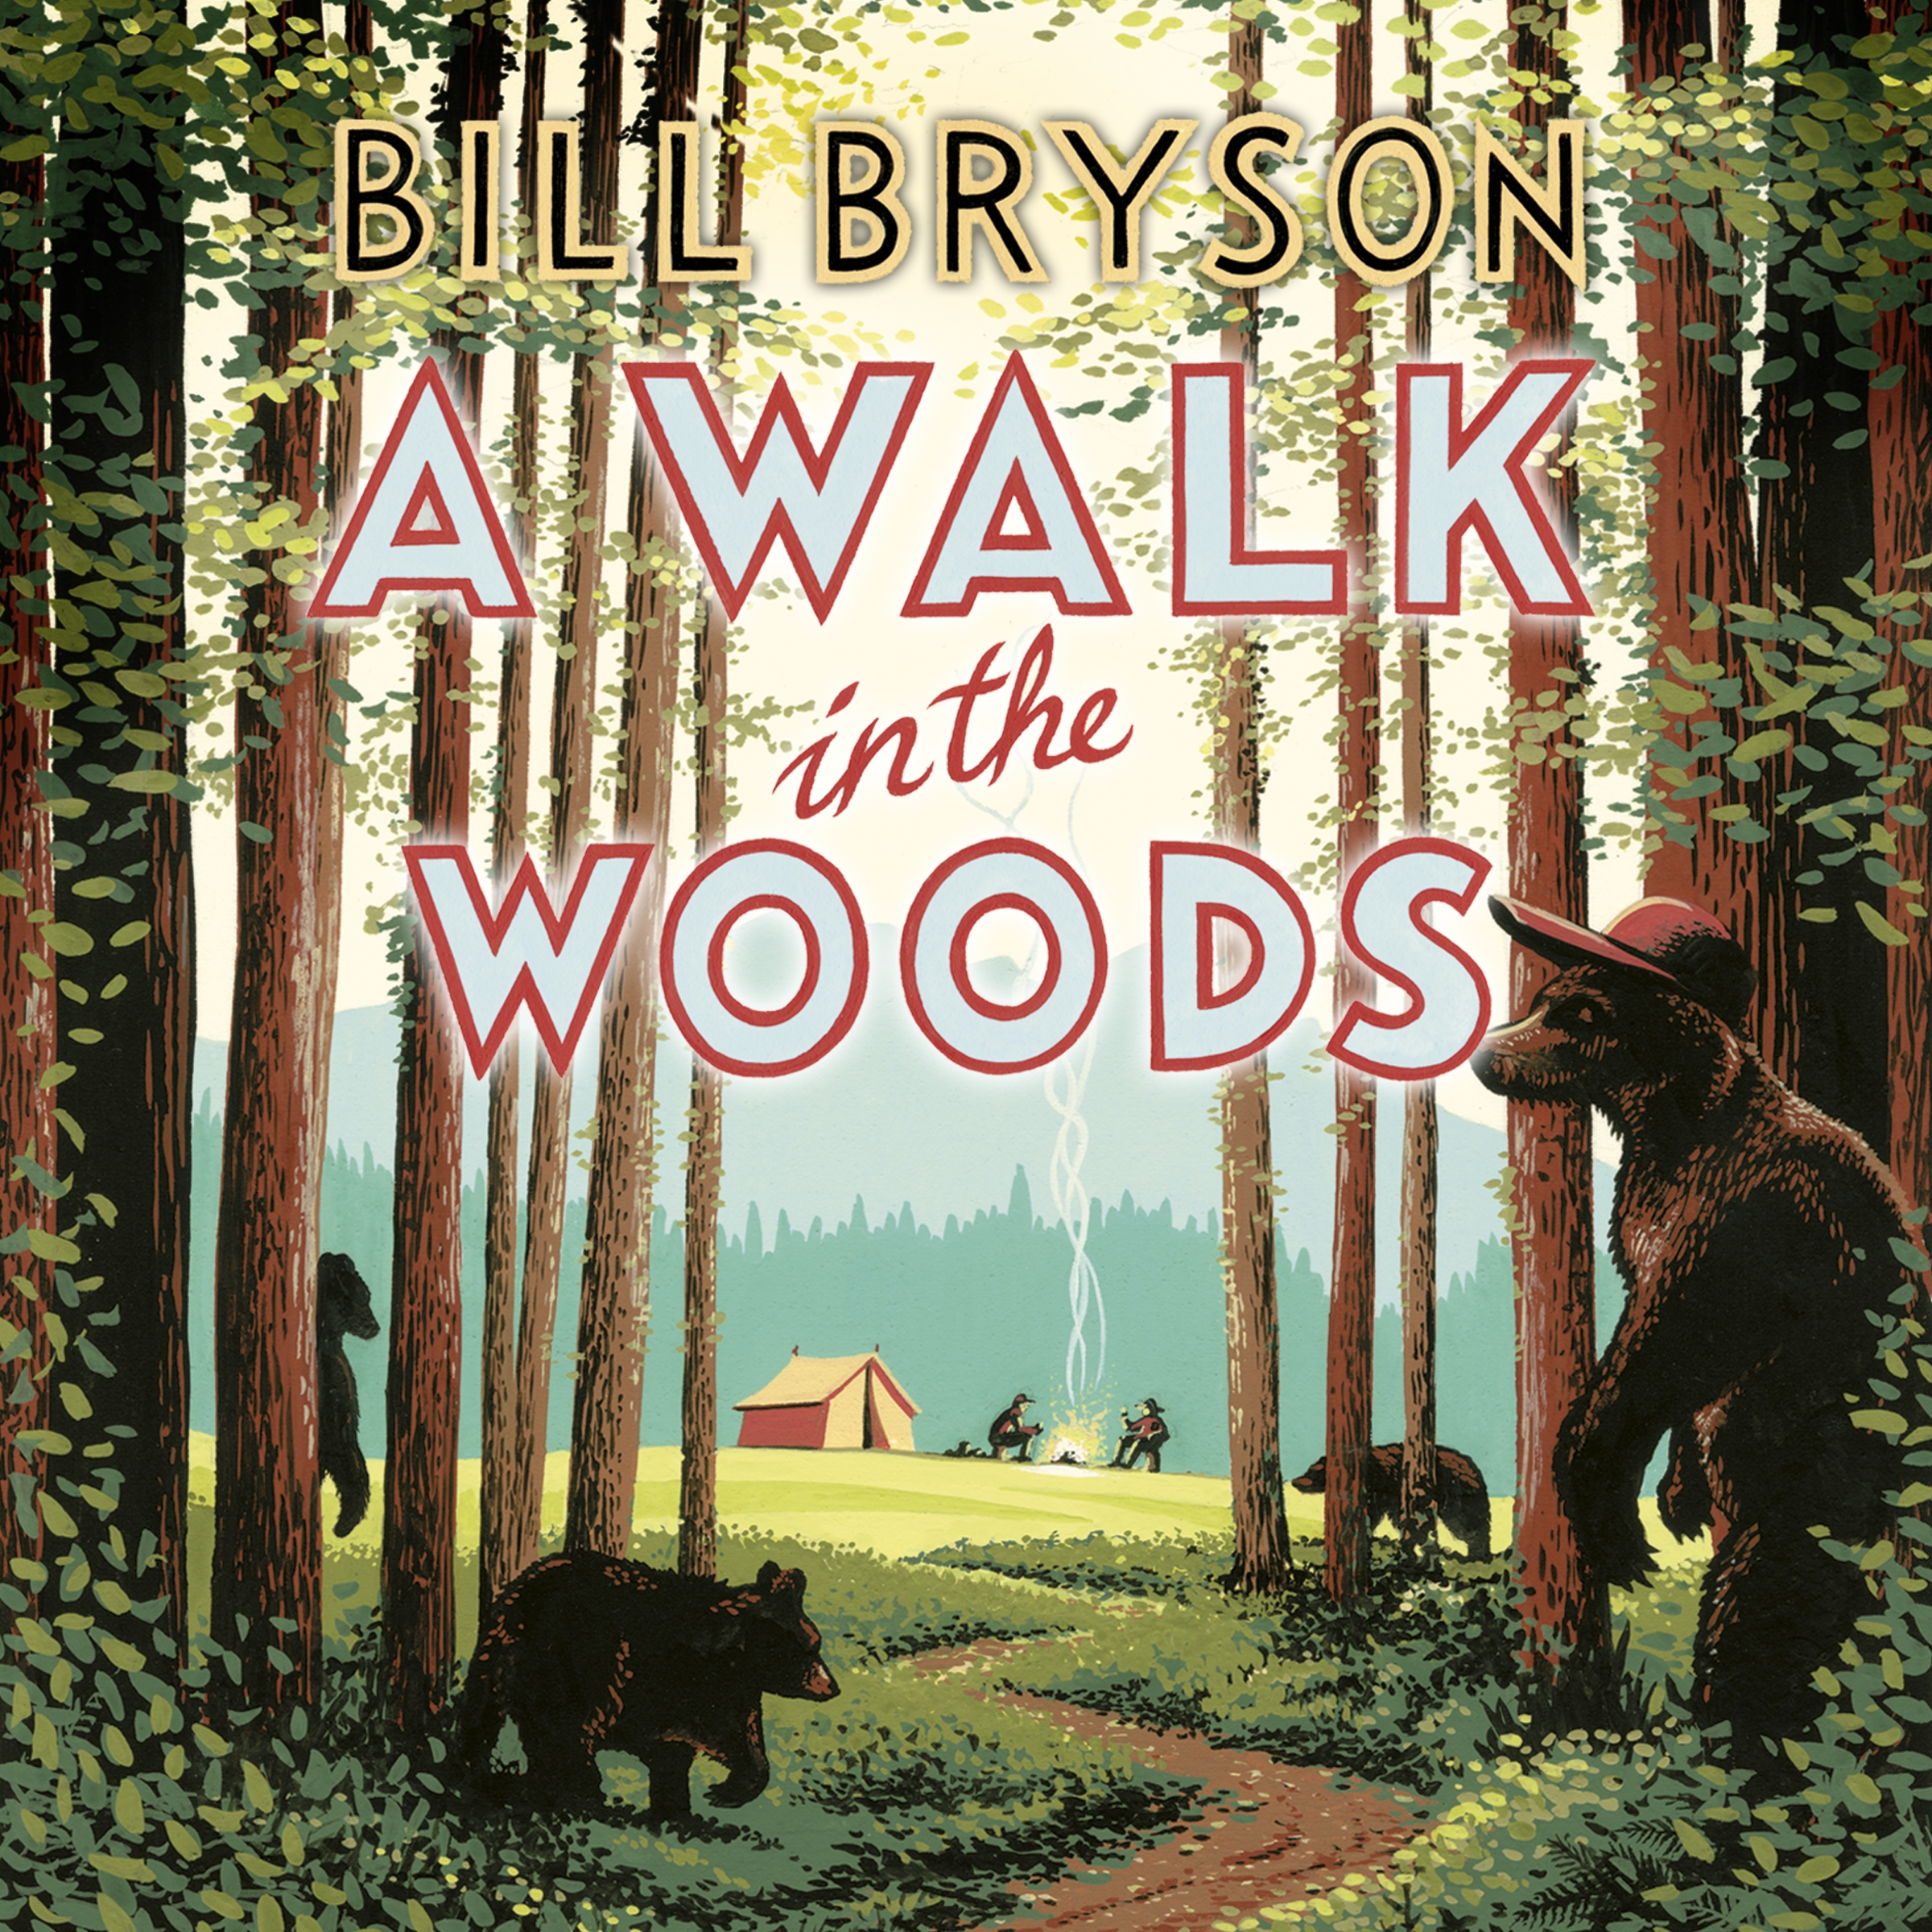 a walk in the woods author